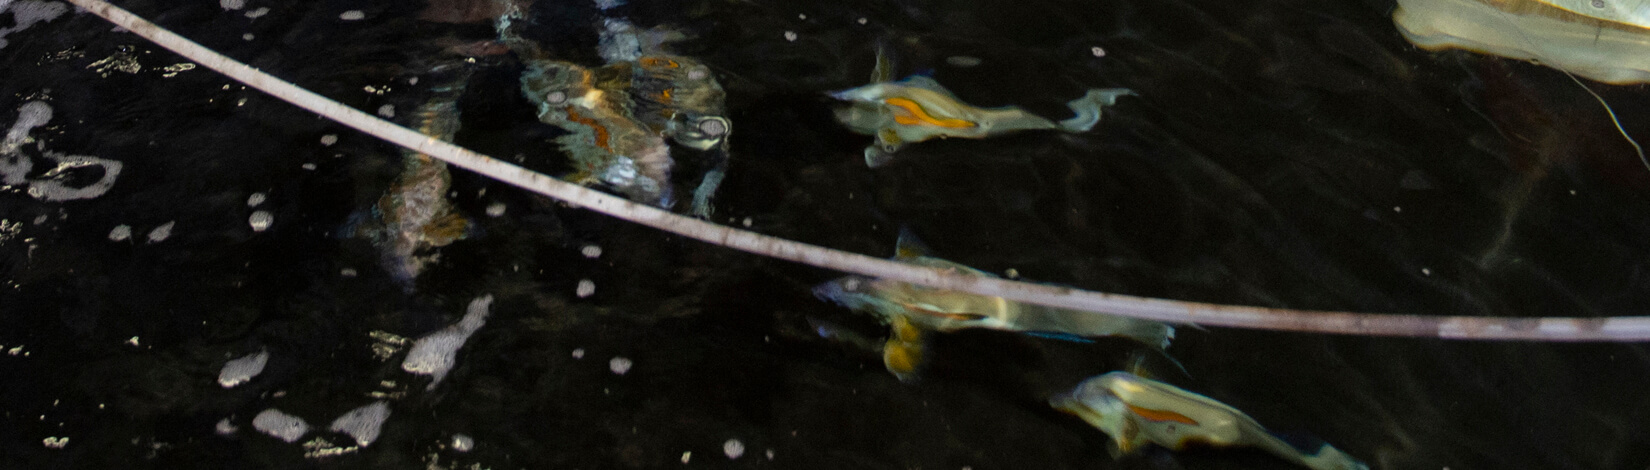 fish eating in a stock tank